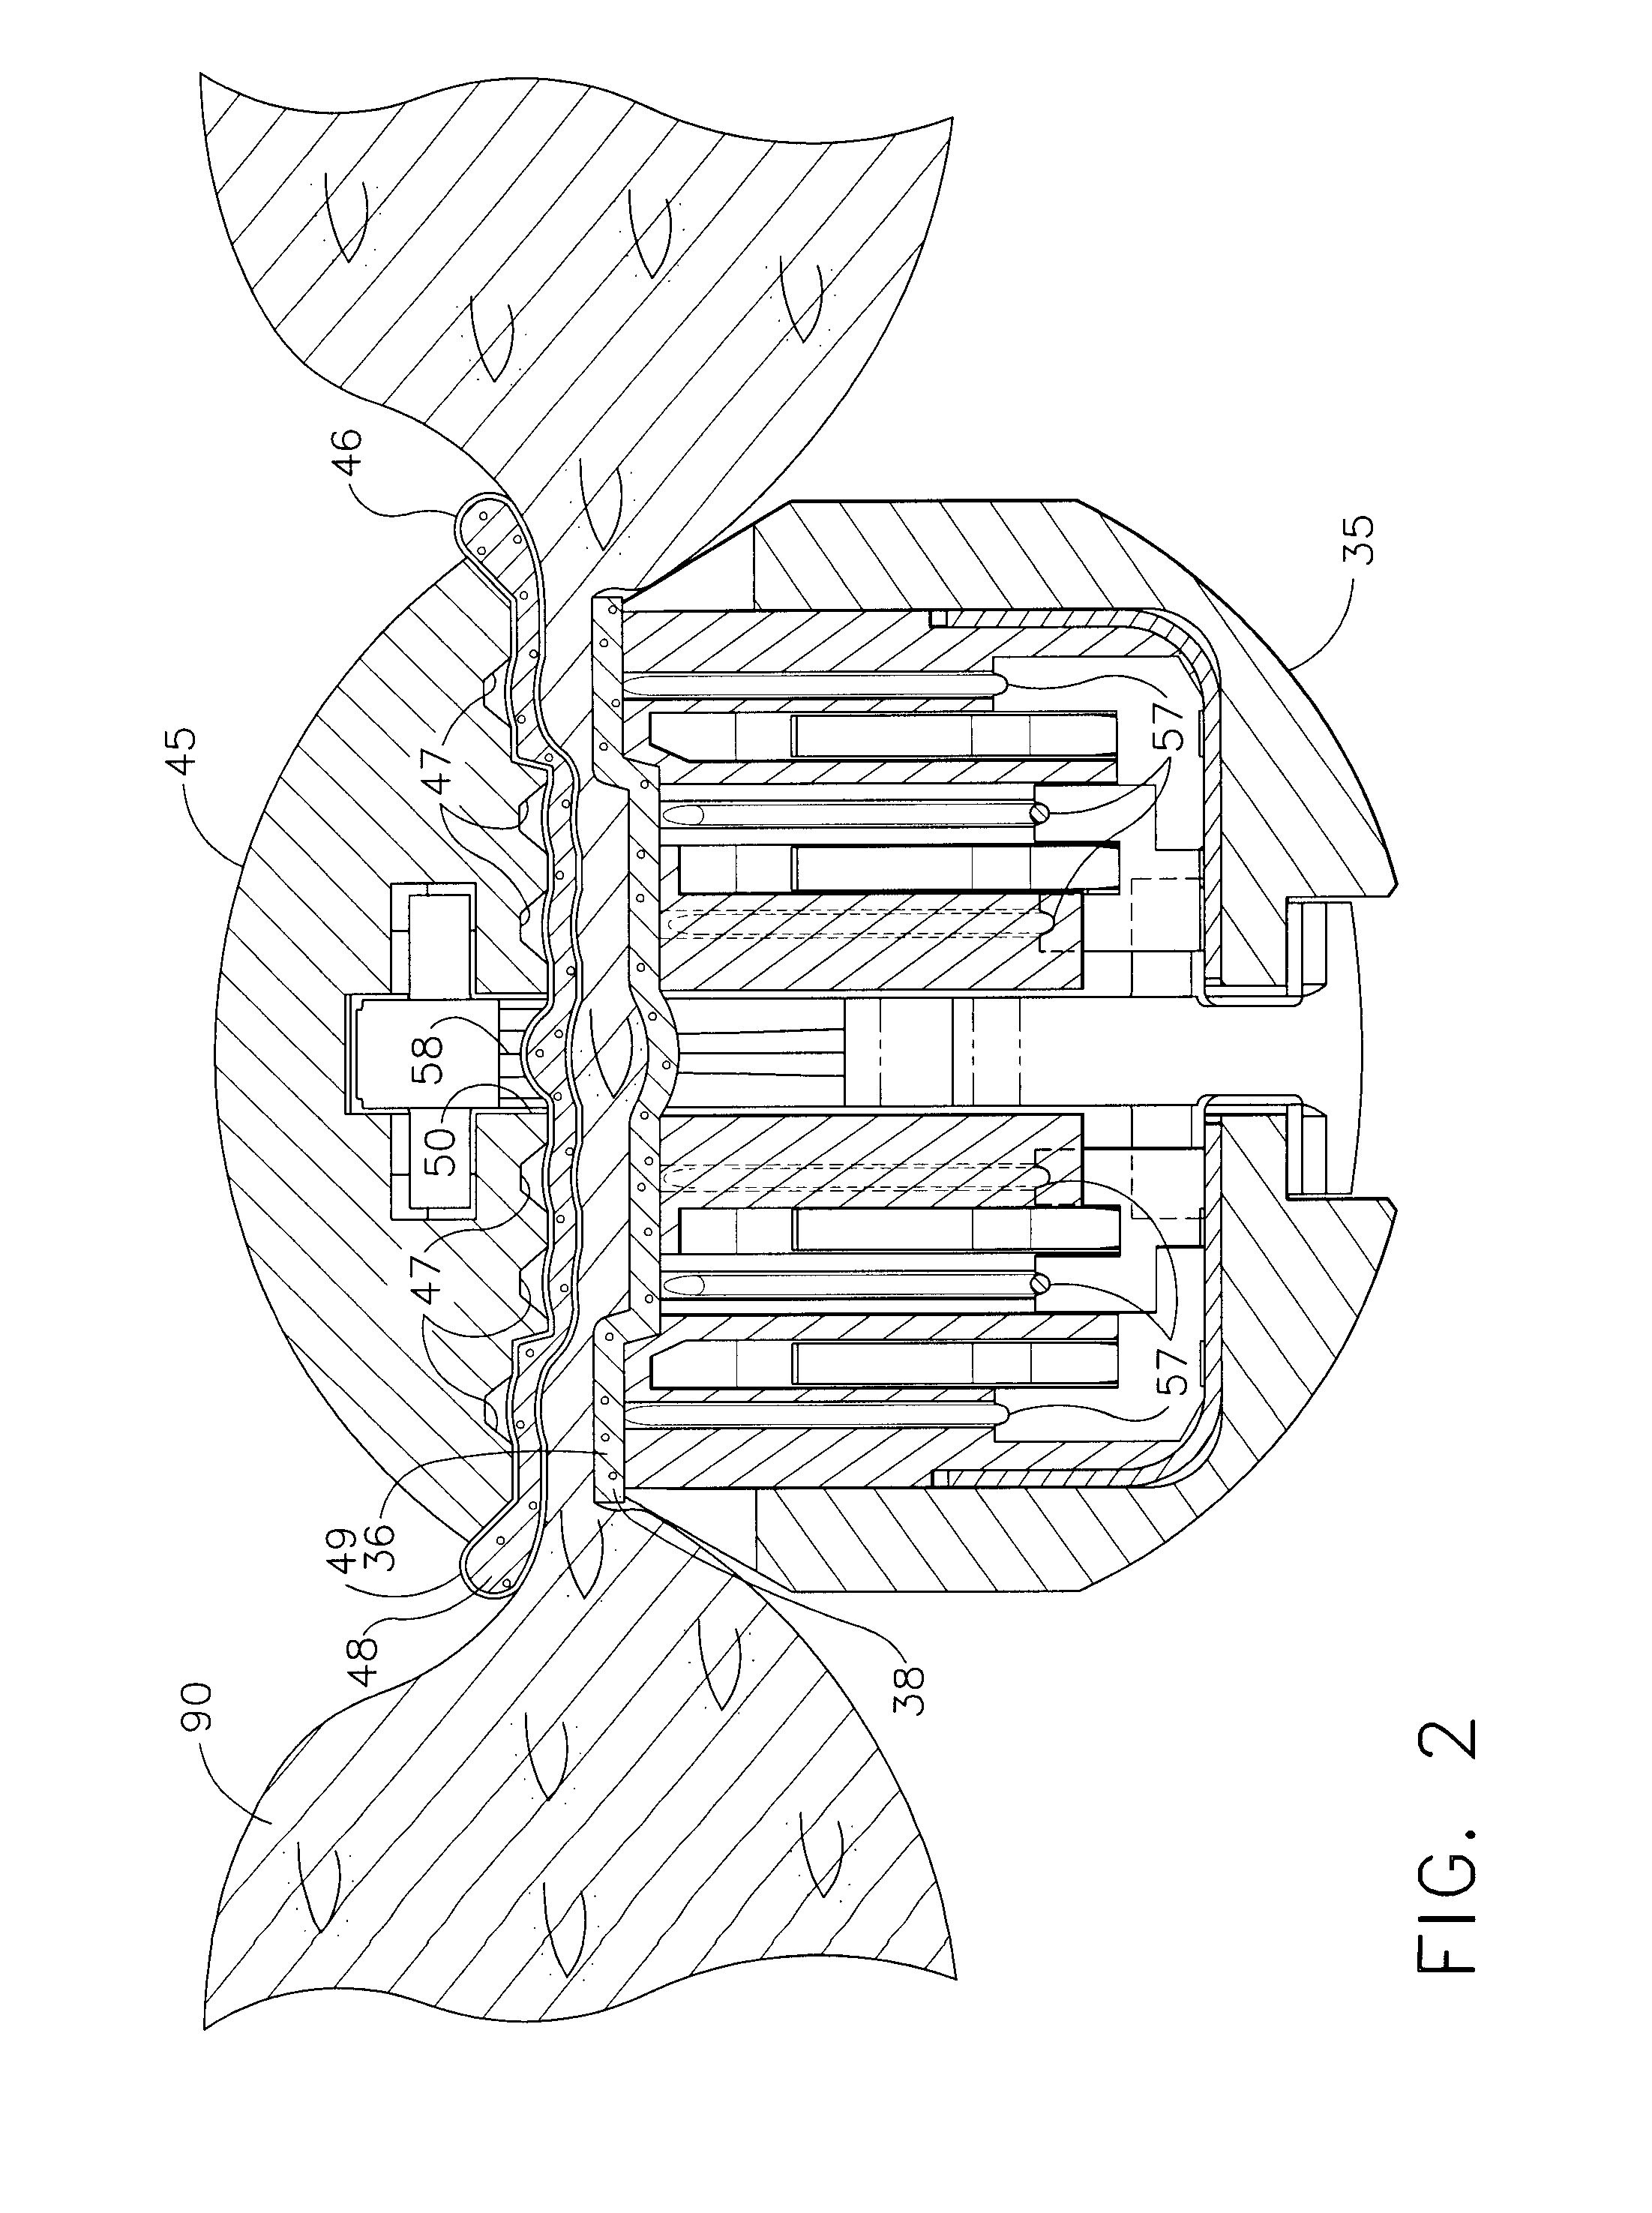 Surgical Fastening Device With Initiator Impregnation of a Matrix or Buttress to Improve Adhesive Application